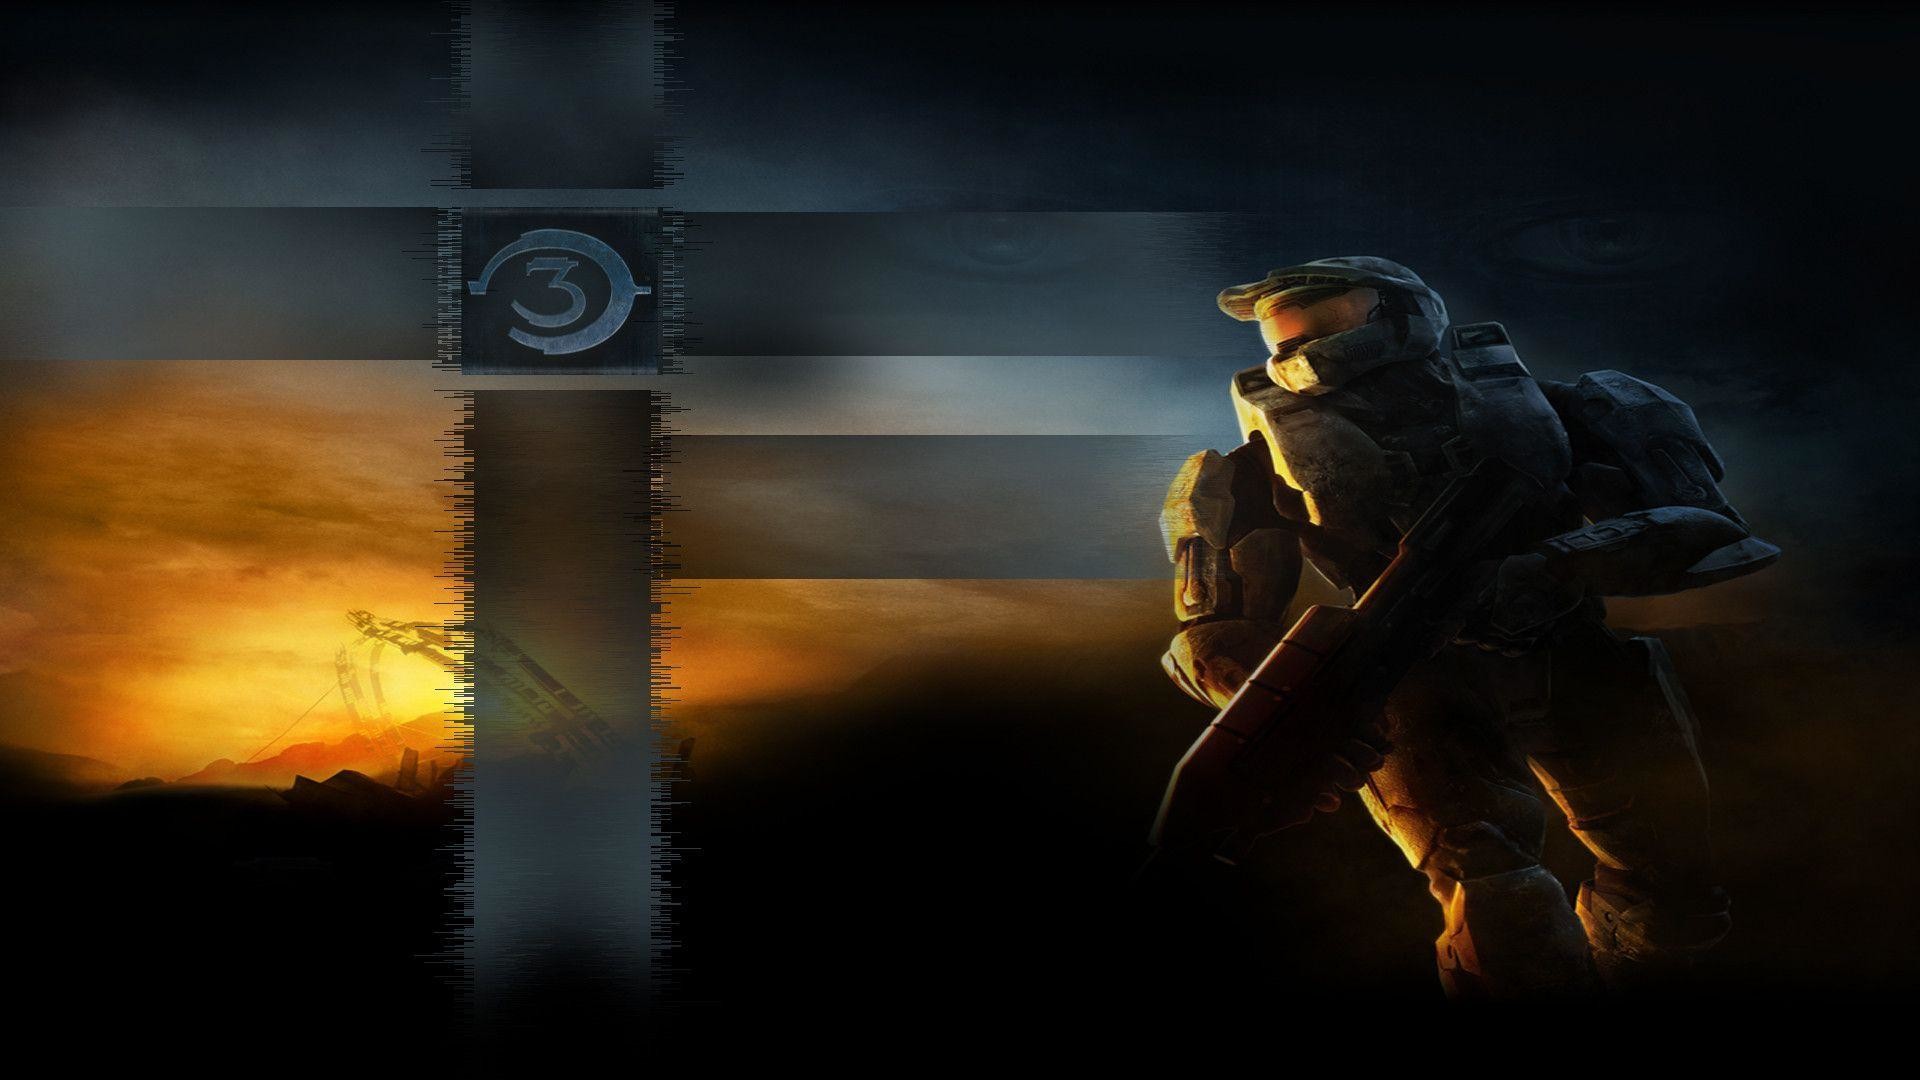 1920x1080 Wallpapers For > Cool Halo 3 Wallpapers Hd